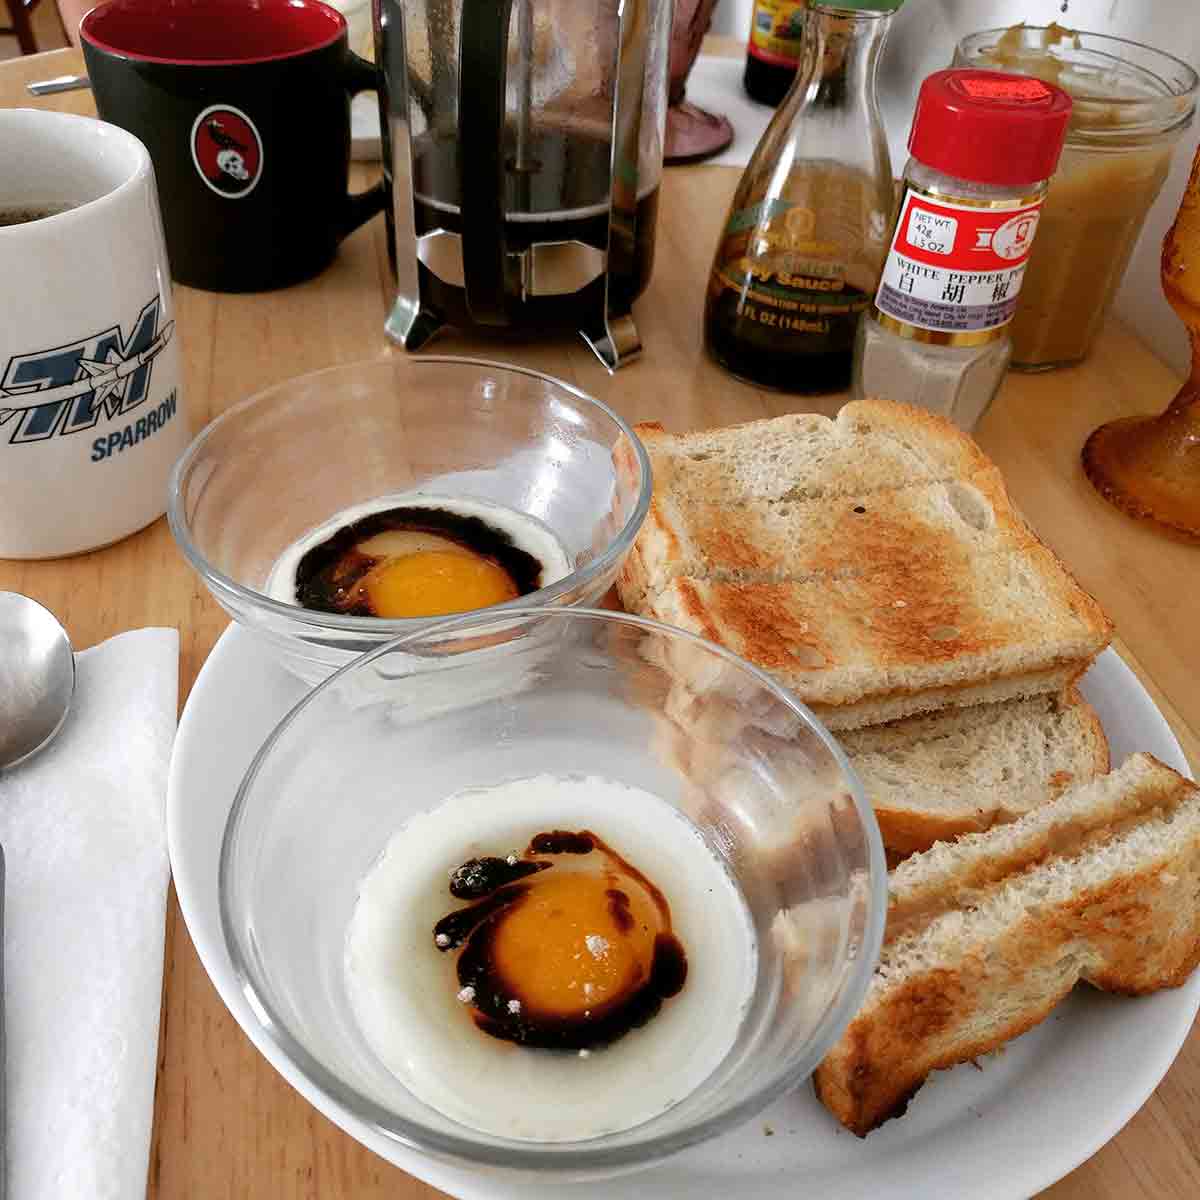 One poached egg each in two custard cups, with a bit of soy and white pepper. The cups are on a plate alongside a stack of kaya toast (kaya and butter sandwiched between toast cut into strips). In the background is a coffee mug next to a French press, along with the condiments used in the breakfast.